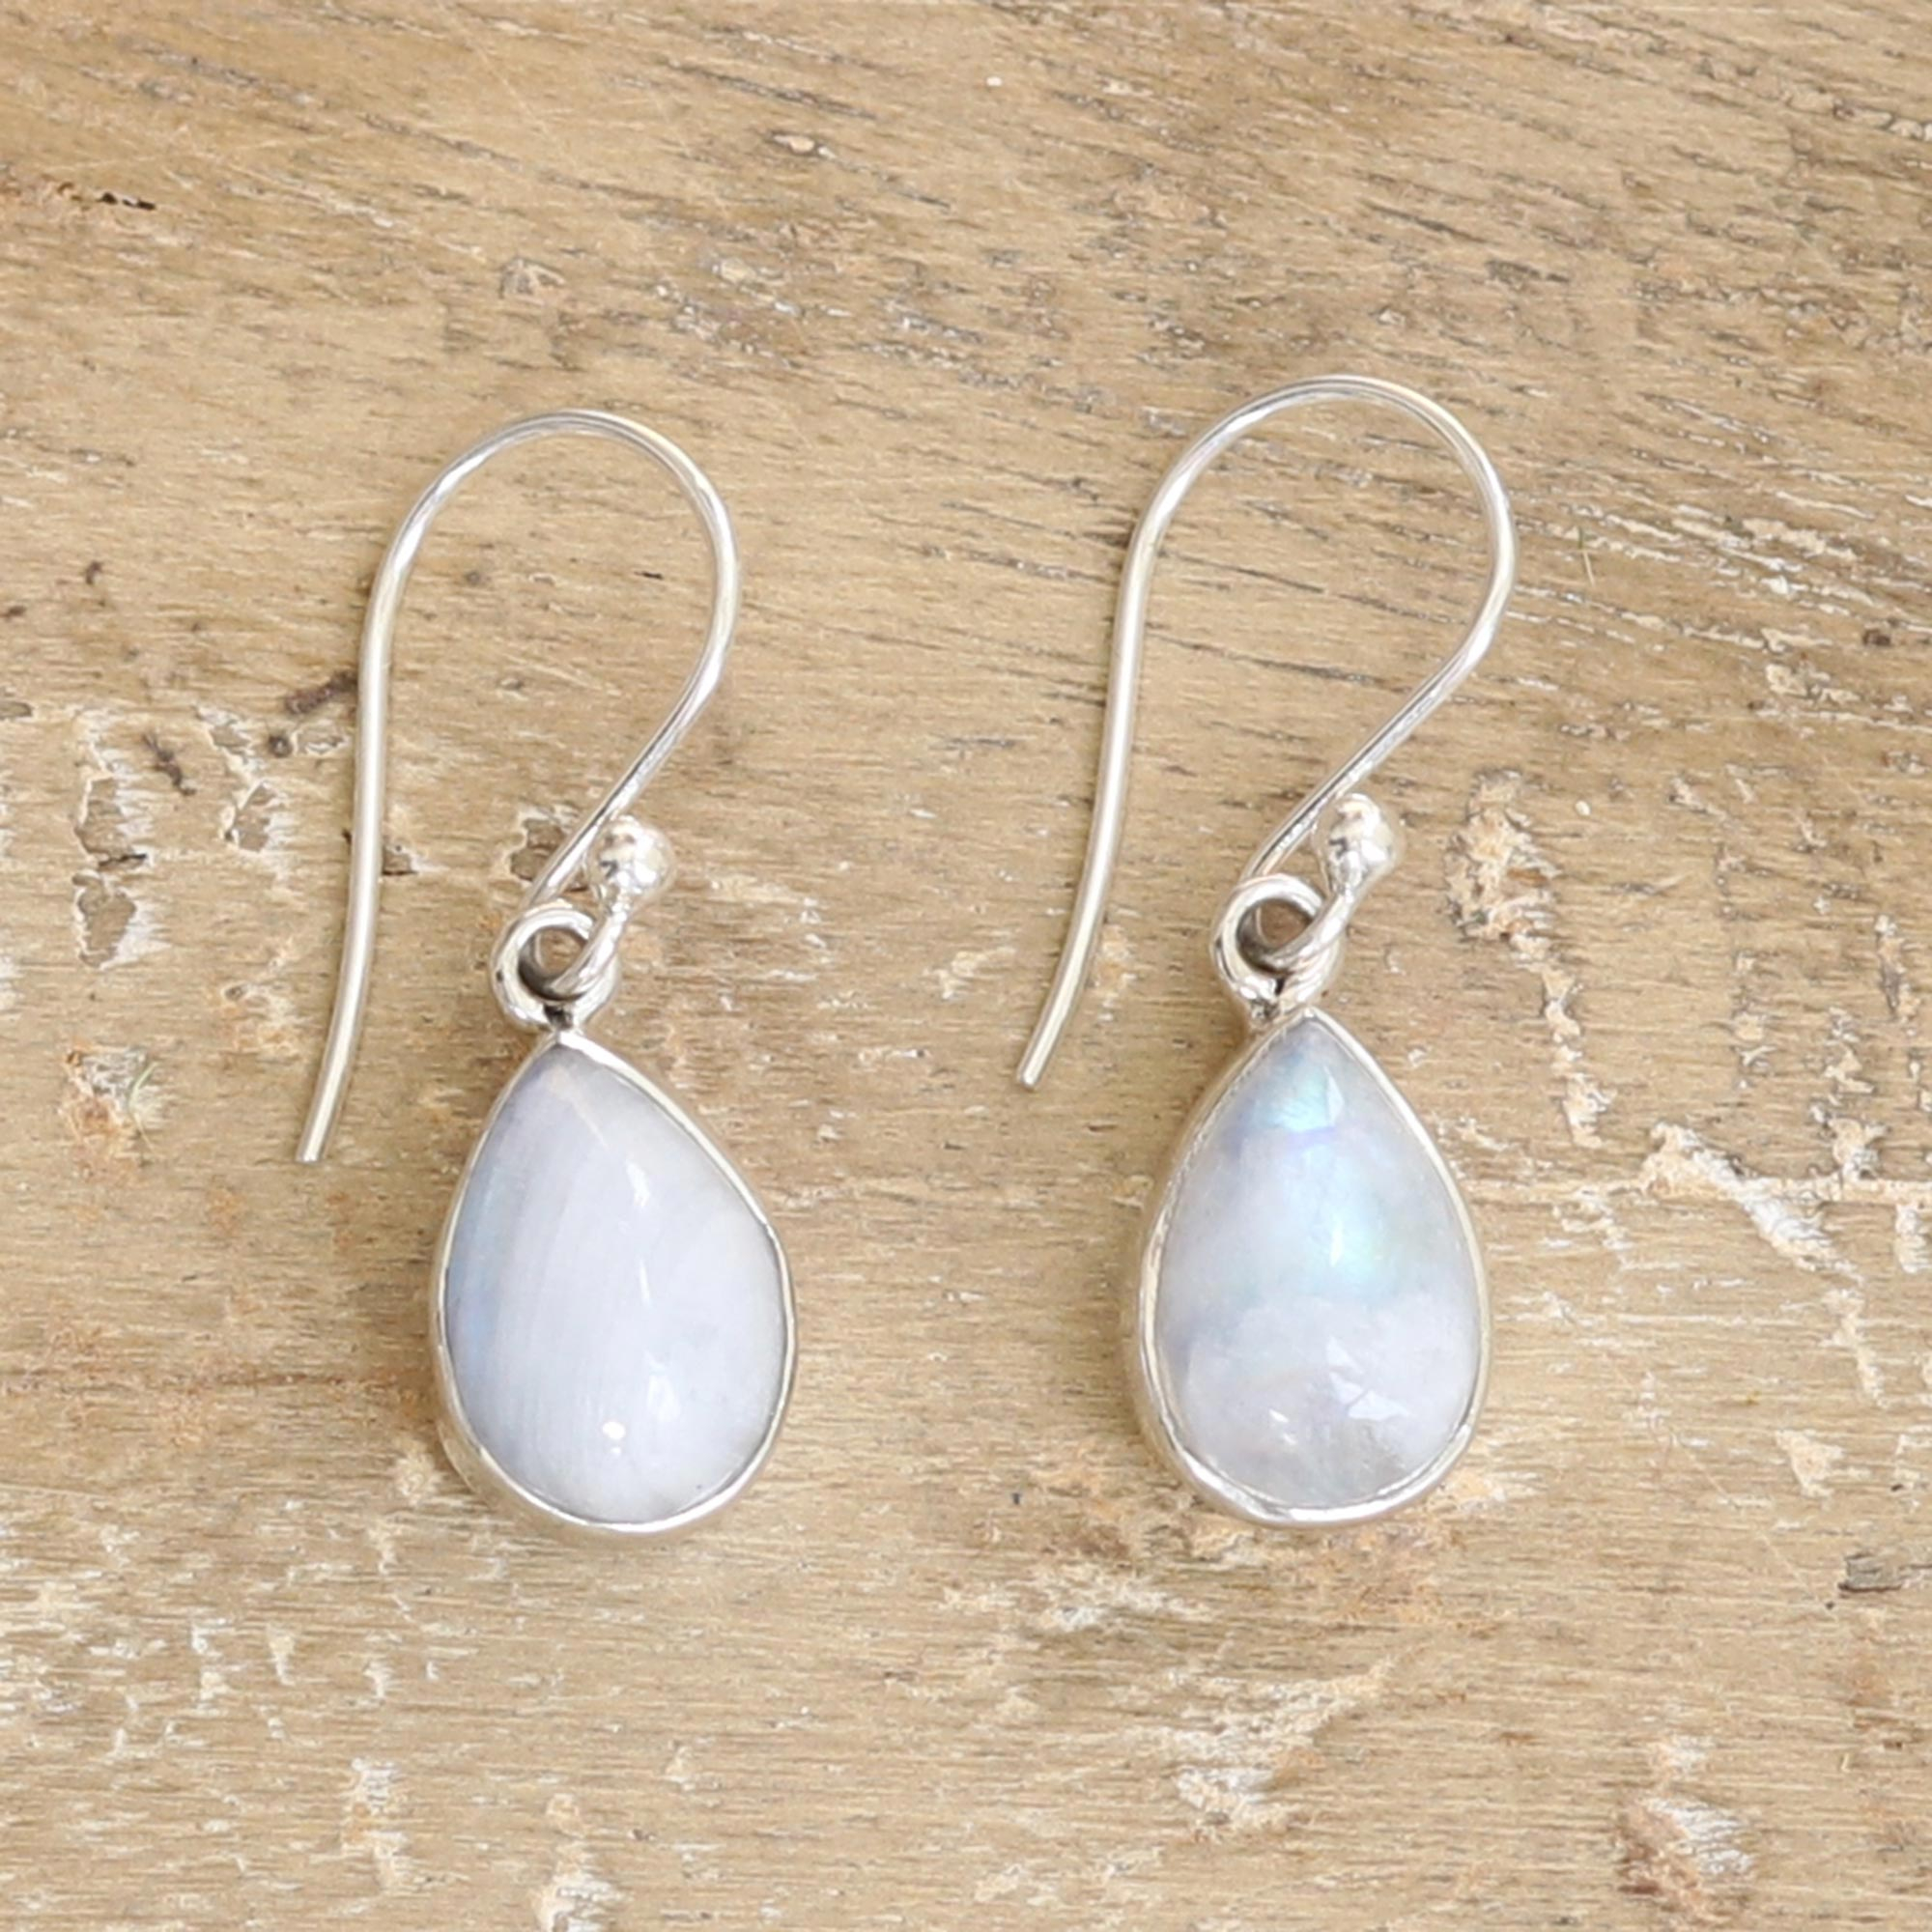 Moonstone and Eco Silver Long Drop Earrings Faceted Rainbow Stones.